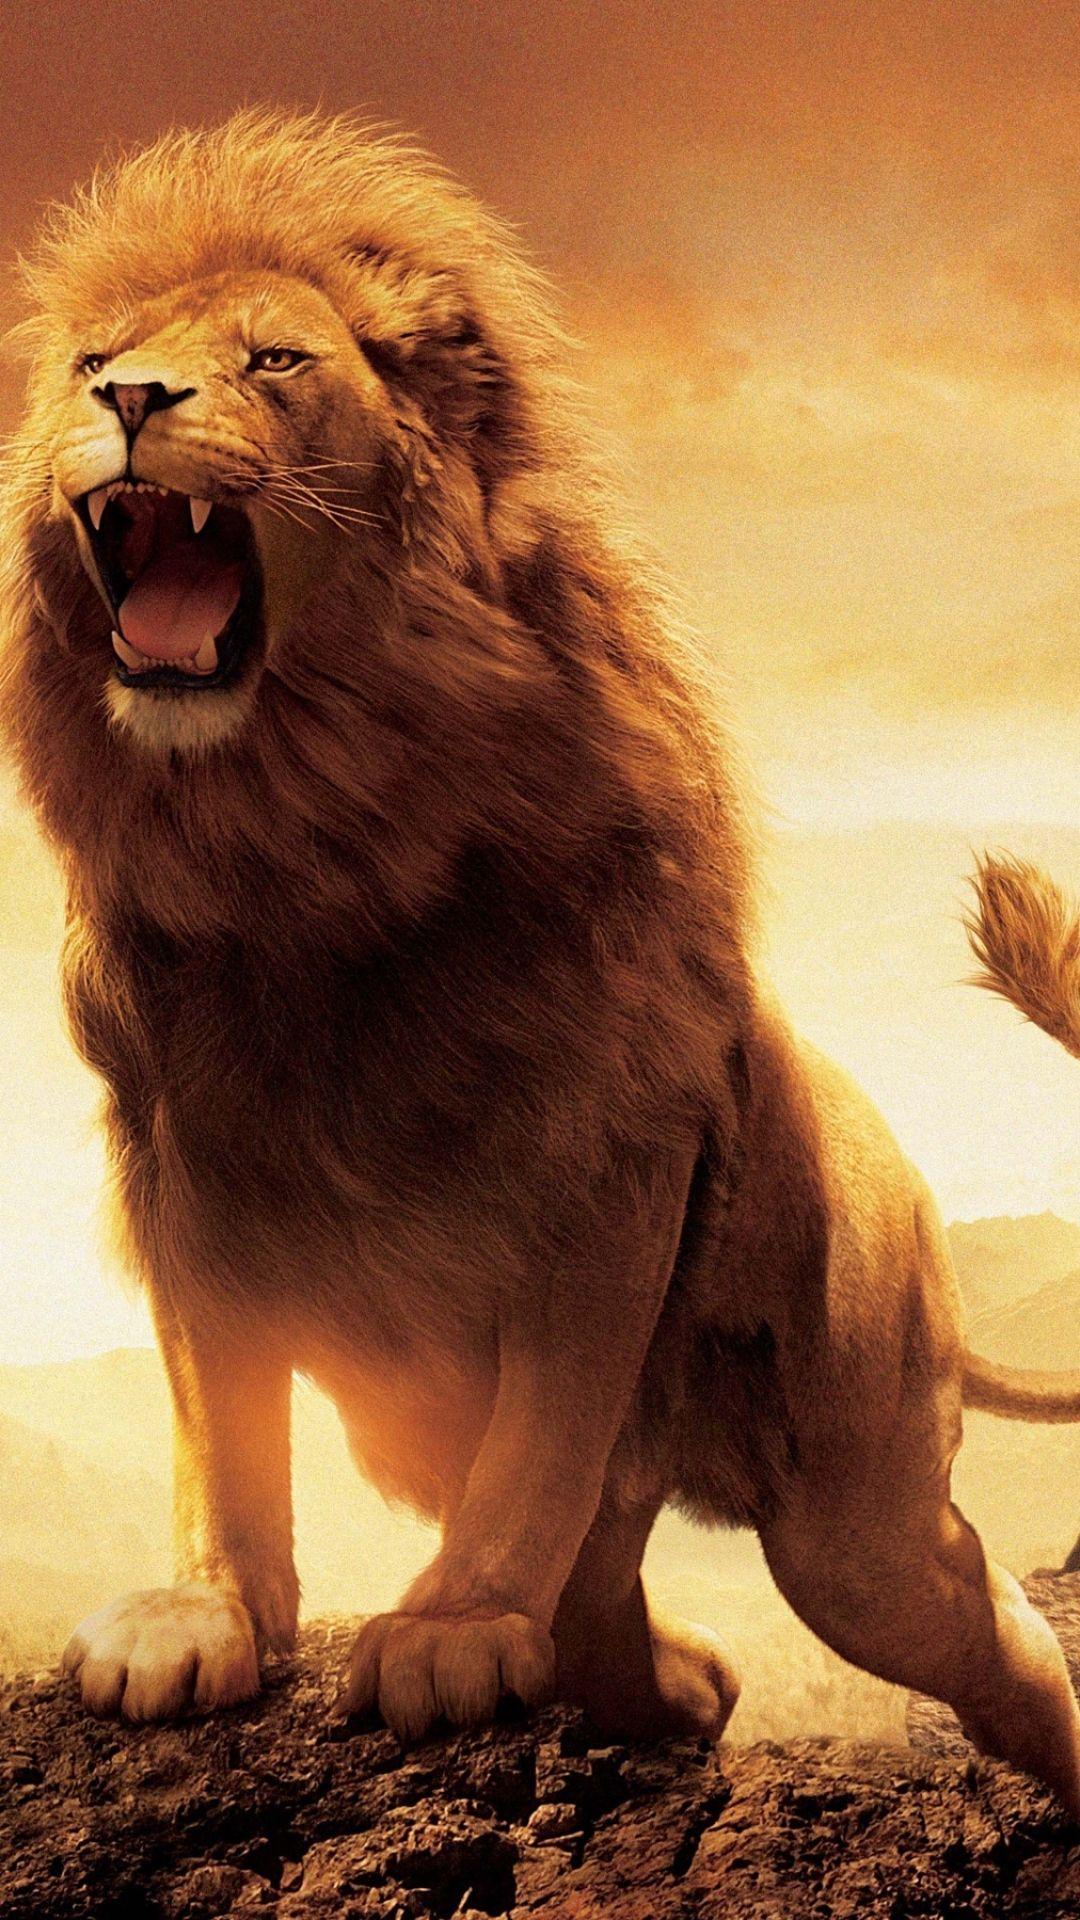 Movie The Chronicles Of Narnia: The Lion, The Witch And The Wardrobe